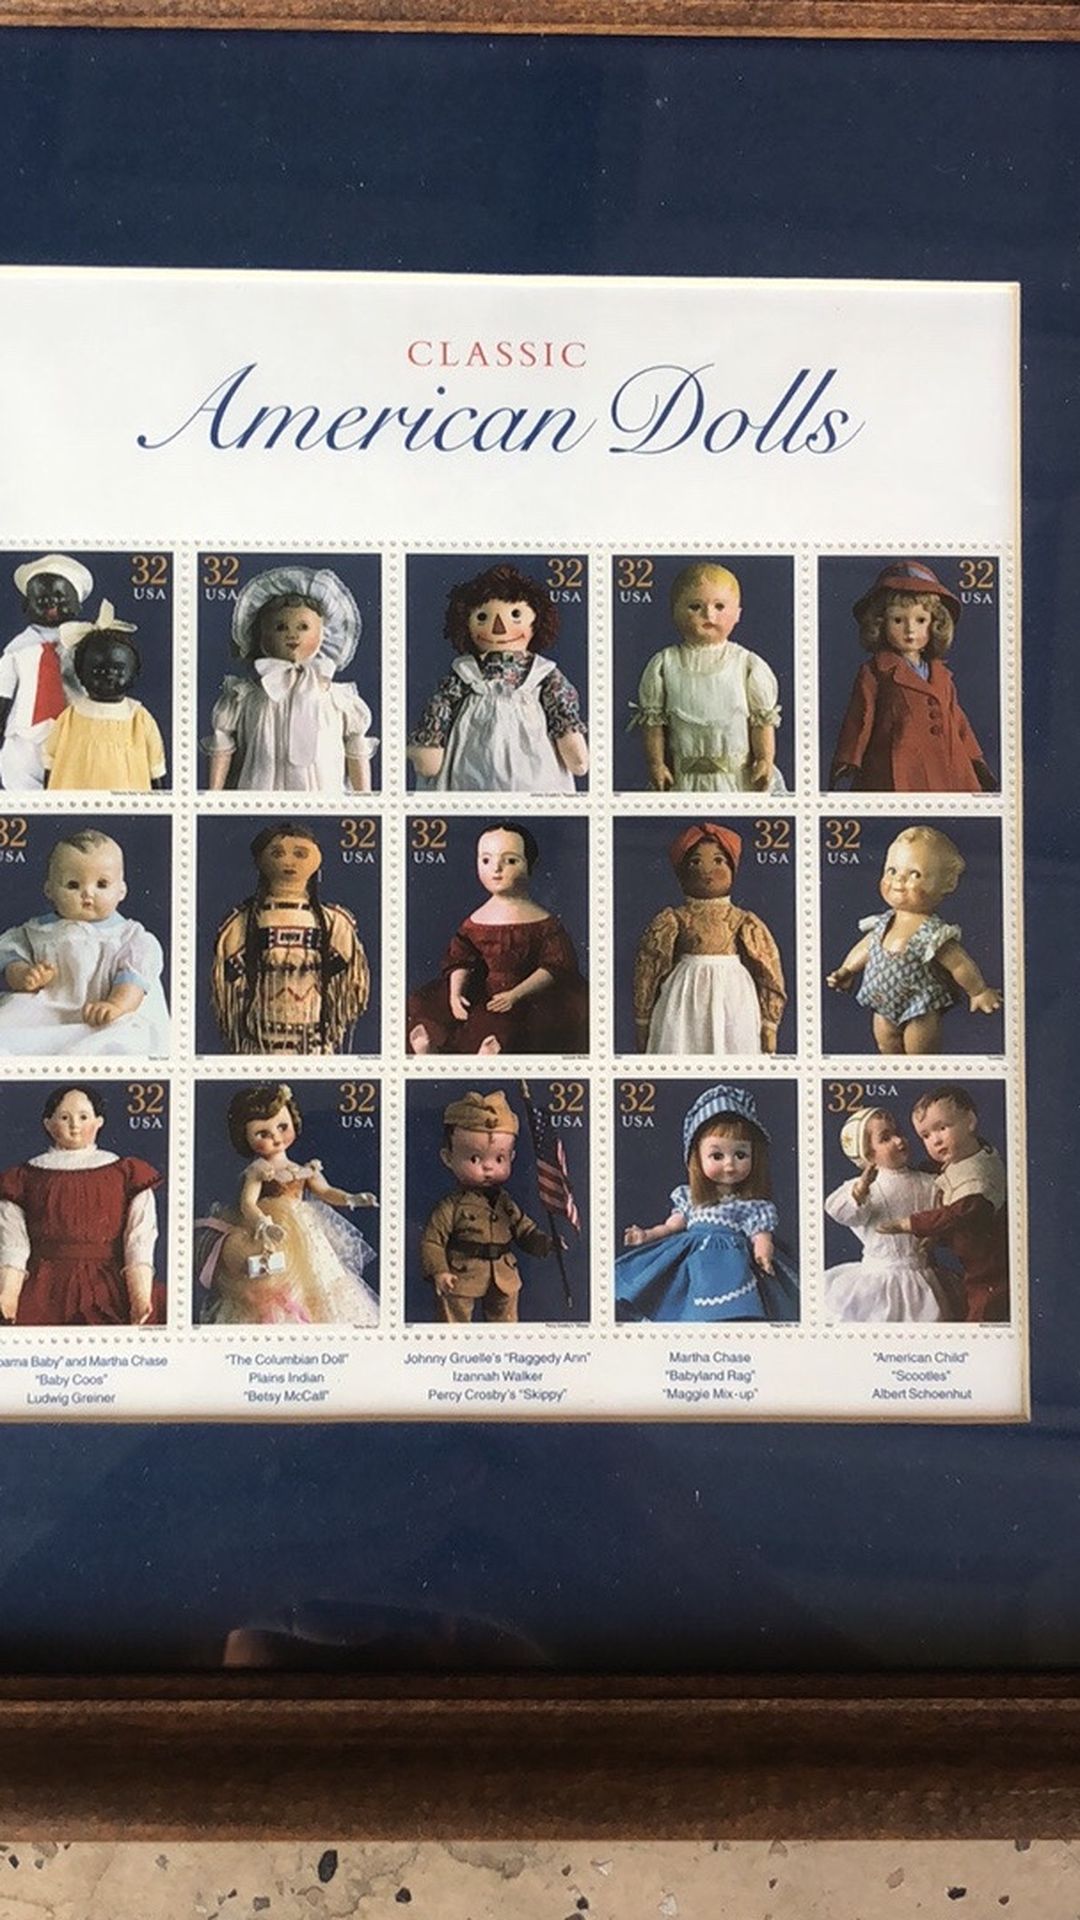 Framed Vintage Classic American Dolls Stamps Approx 11.25”x11.25”